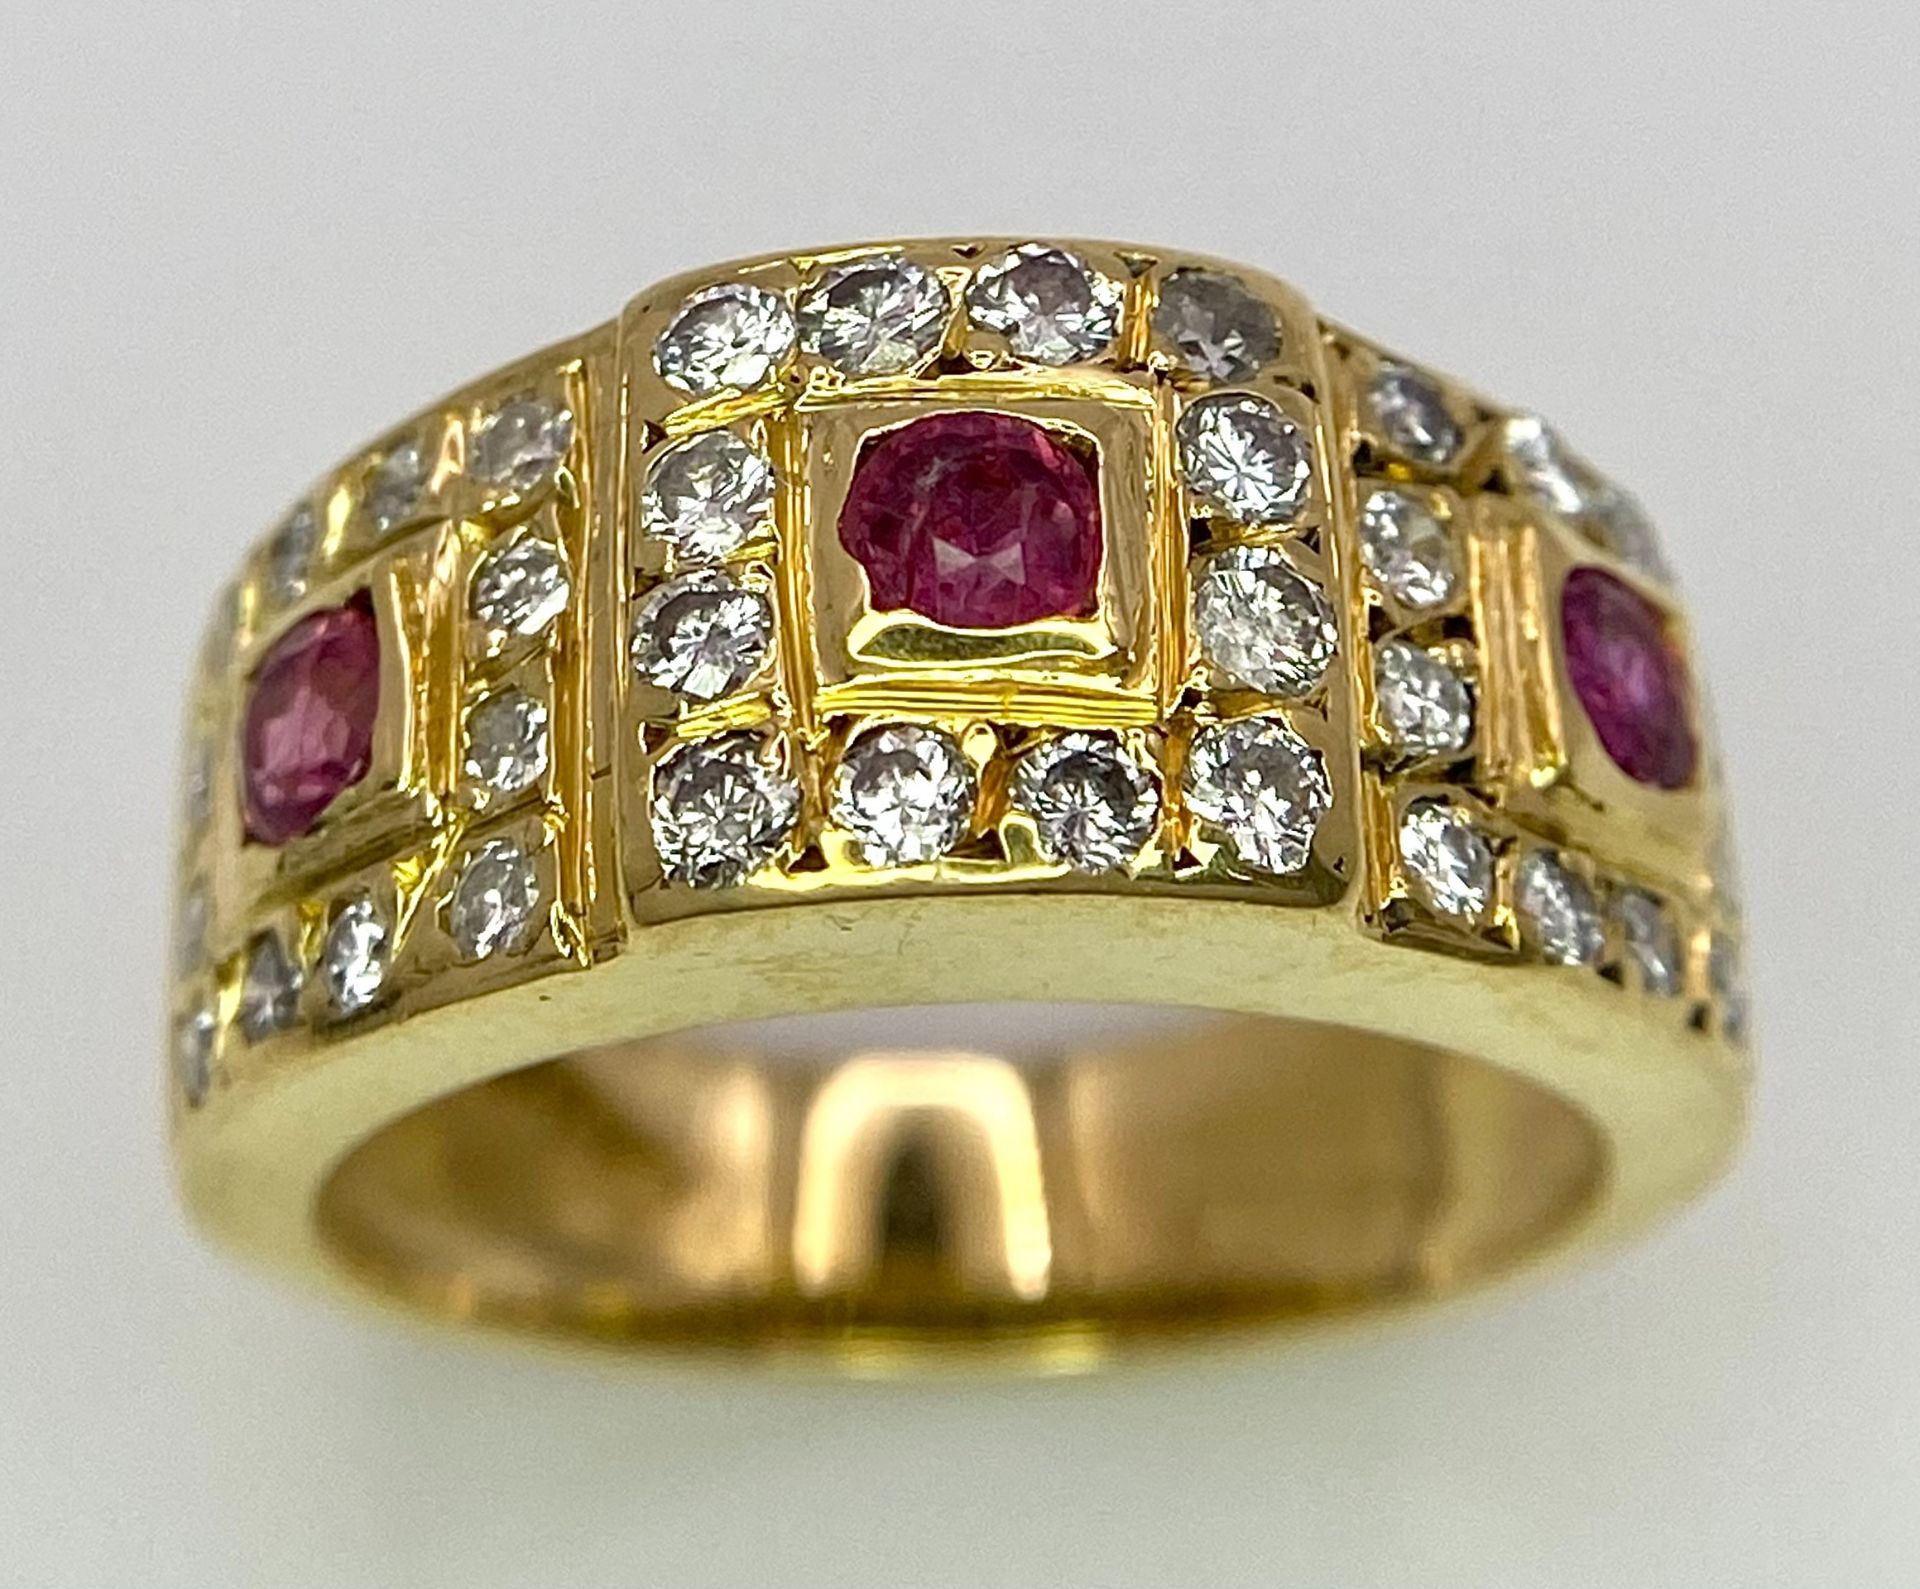 AN 18K YELLOW GOLD DIAMOND & RUBY RING. 0.60ctw, size K, 6.8g total weight. Ref: SC 8072 - Image 2 of 9